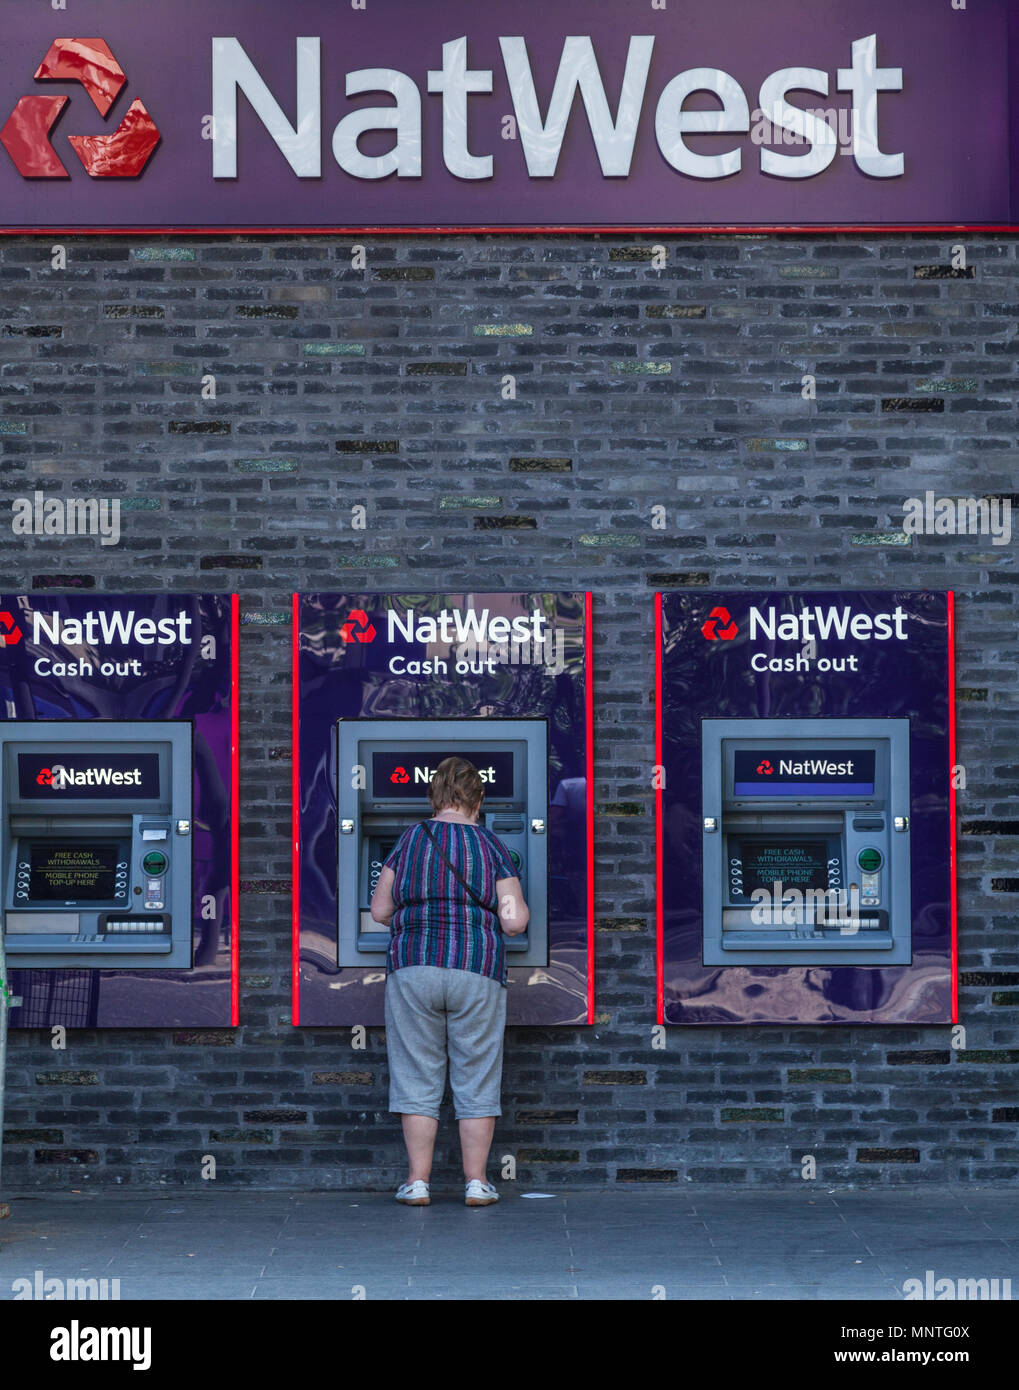 Woman withdrawing cash from Natwest ATM machines in London Stock Photo